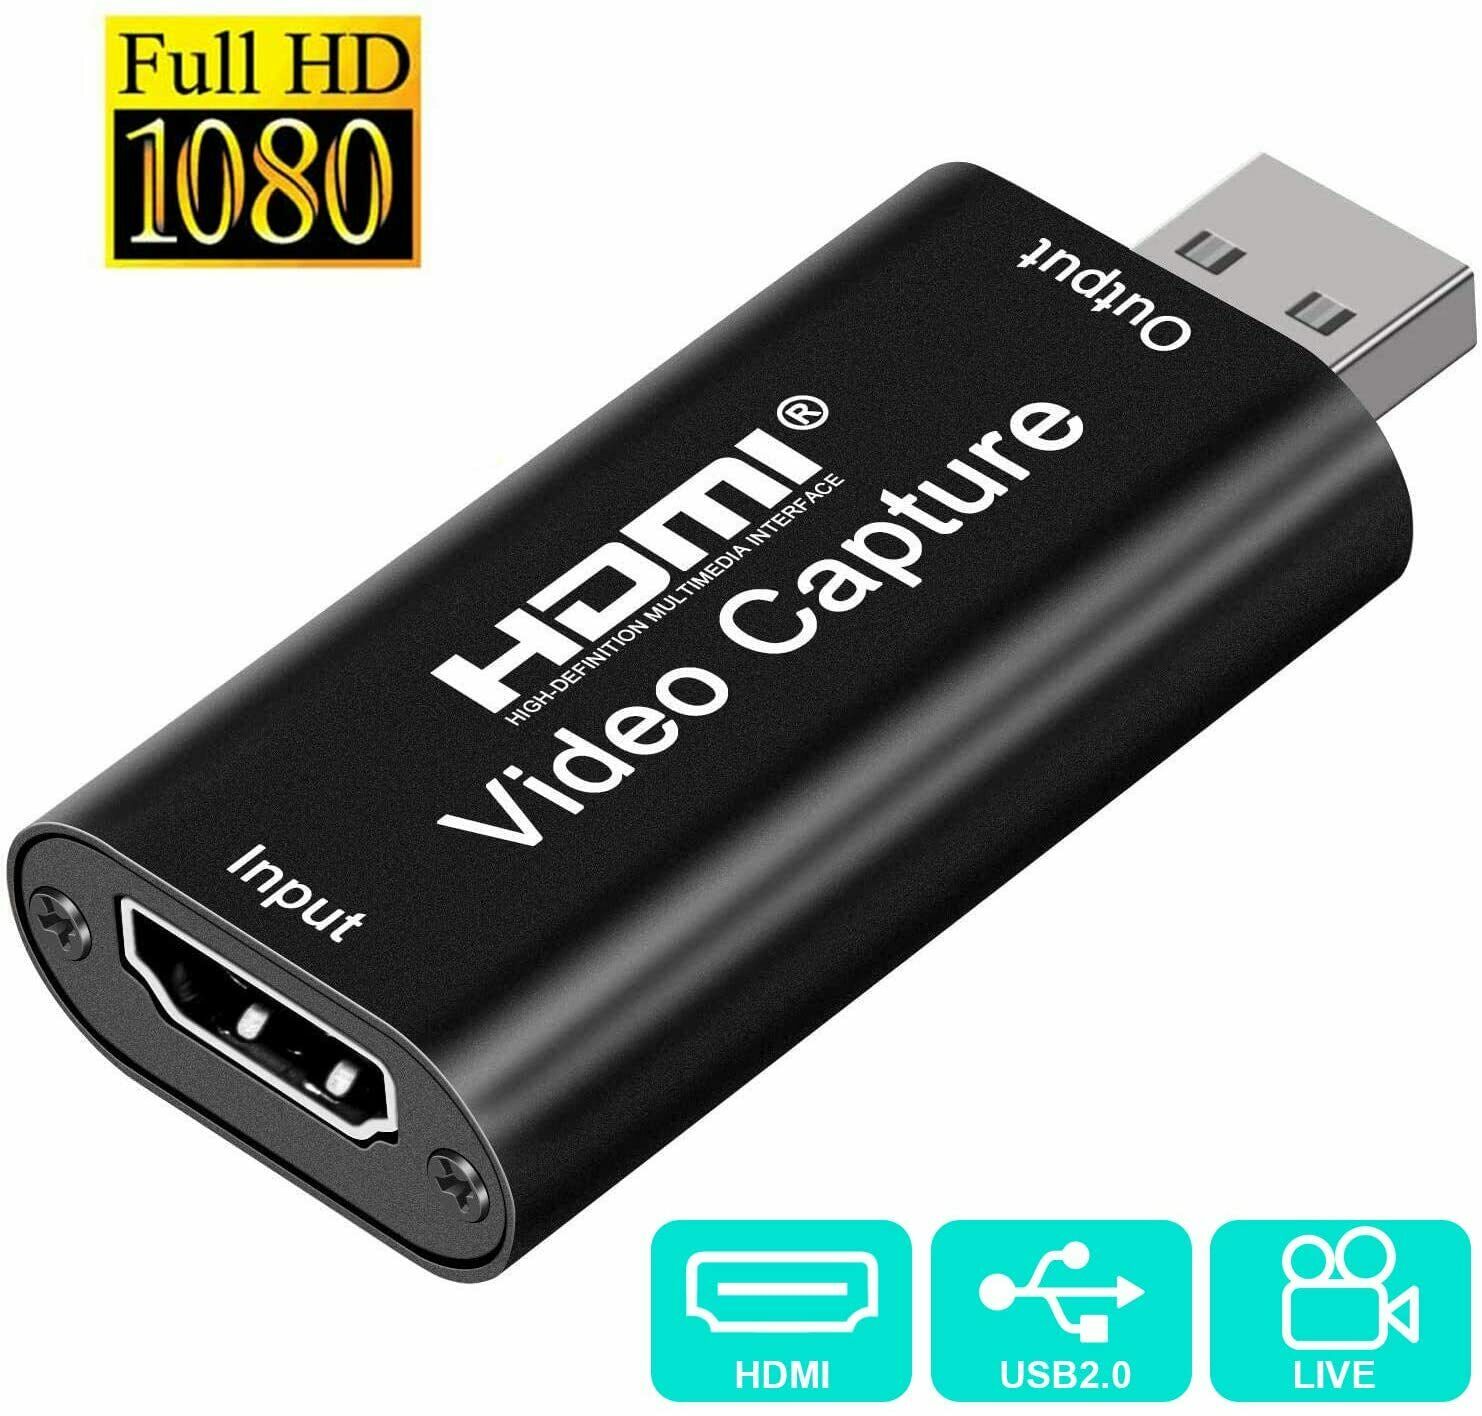 Audio Video Capture Cards, Hdmi Video Capture Card Streaming Hdmi To Usb2.0 Reco